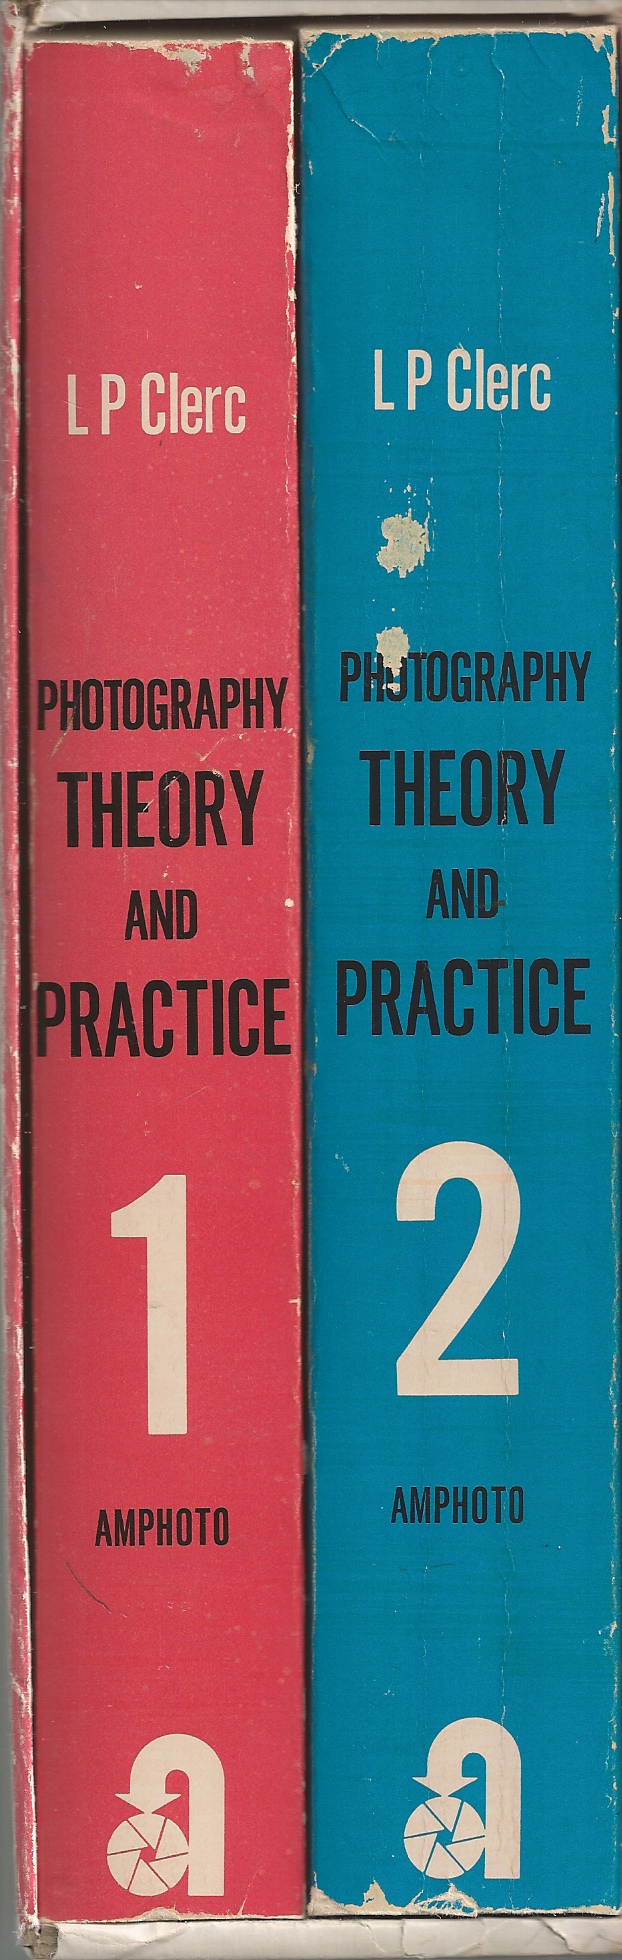 CLERC L. P. , SPENCER D. A. (EDITOR) - Photography Theory and Practice. Vol. 1 & 2 Fundamentals, the Camera, Films, Monochrome Processing, Positive Materials, Color Processes